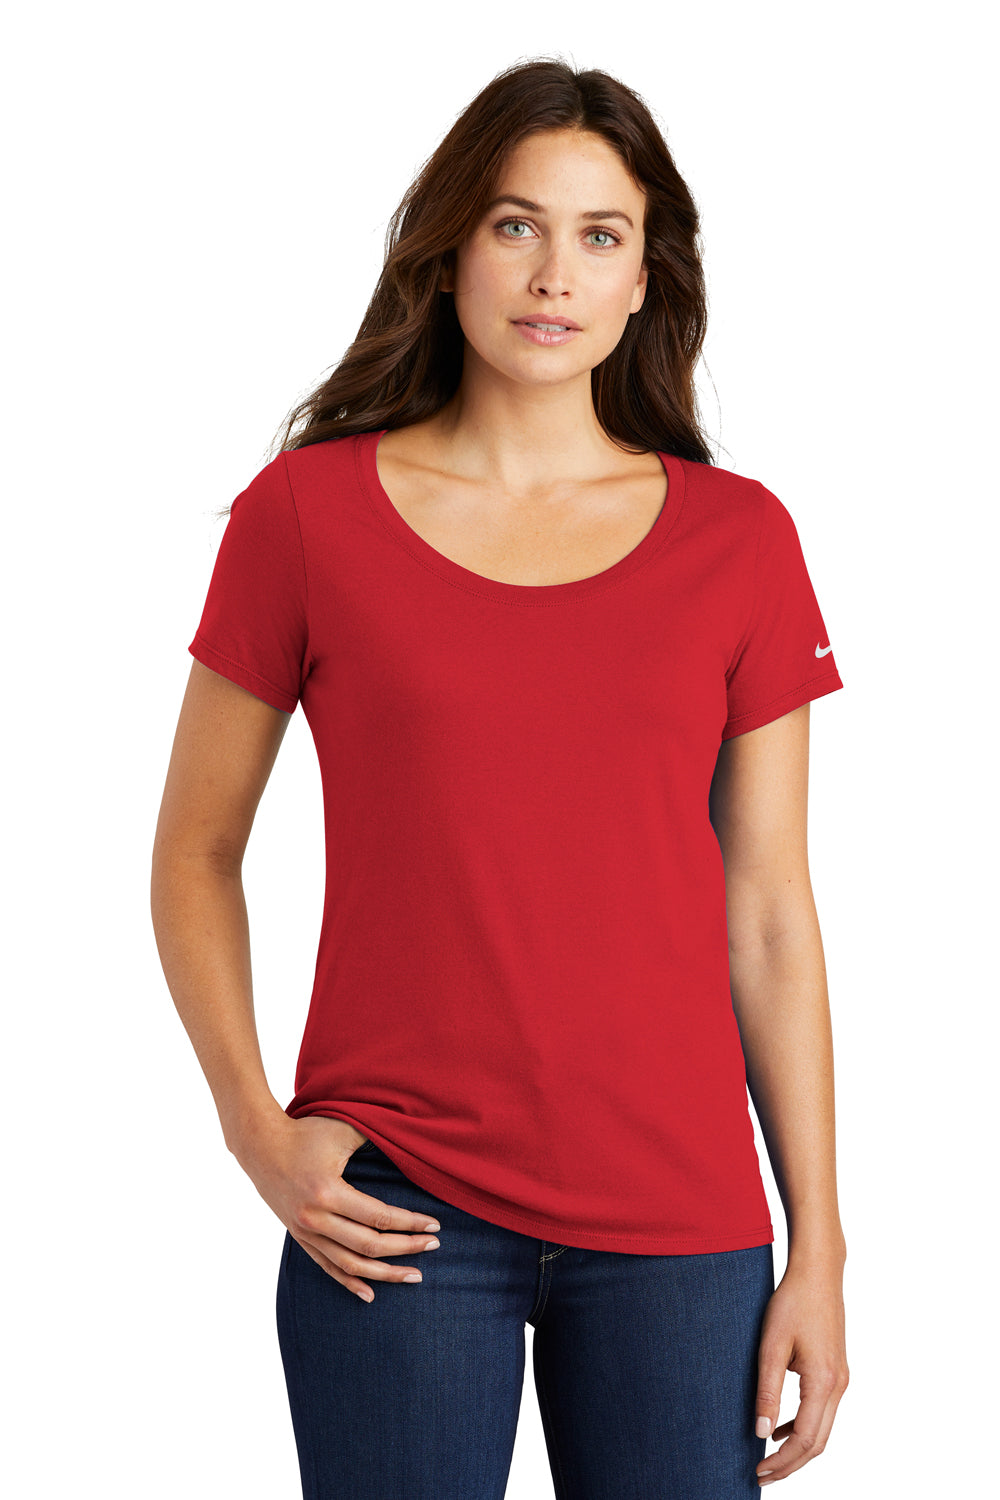 Nike NKBQ5236 Womens Core Short Sleeve Scoop Neck T-Shirt Gym Red Front